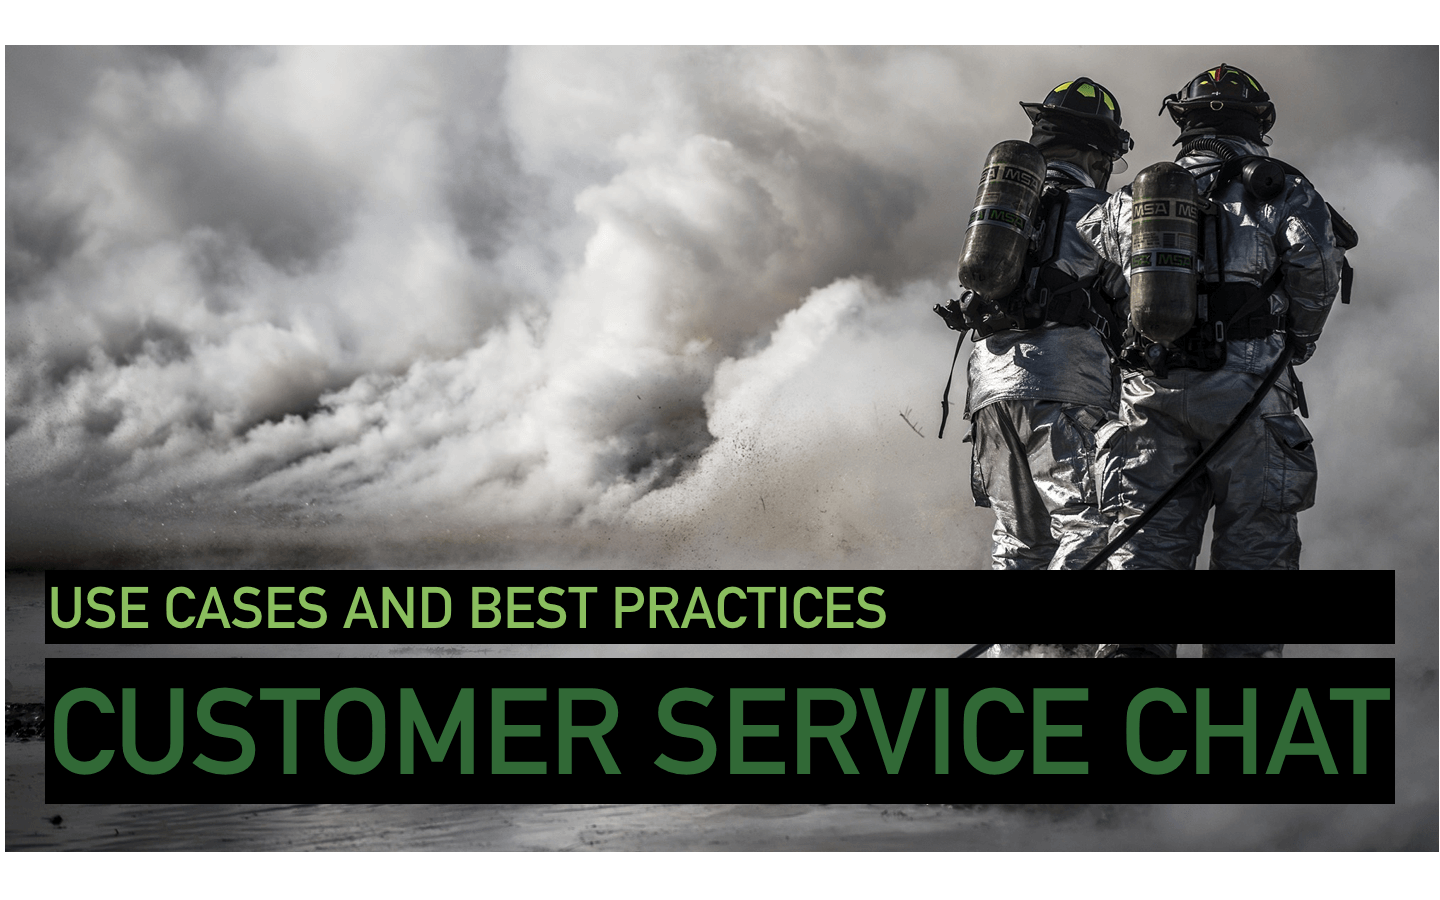 Customer Service Chat: Use Cases & Best Practices